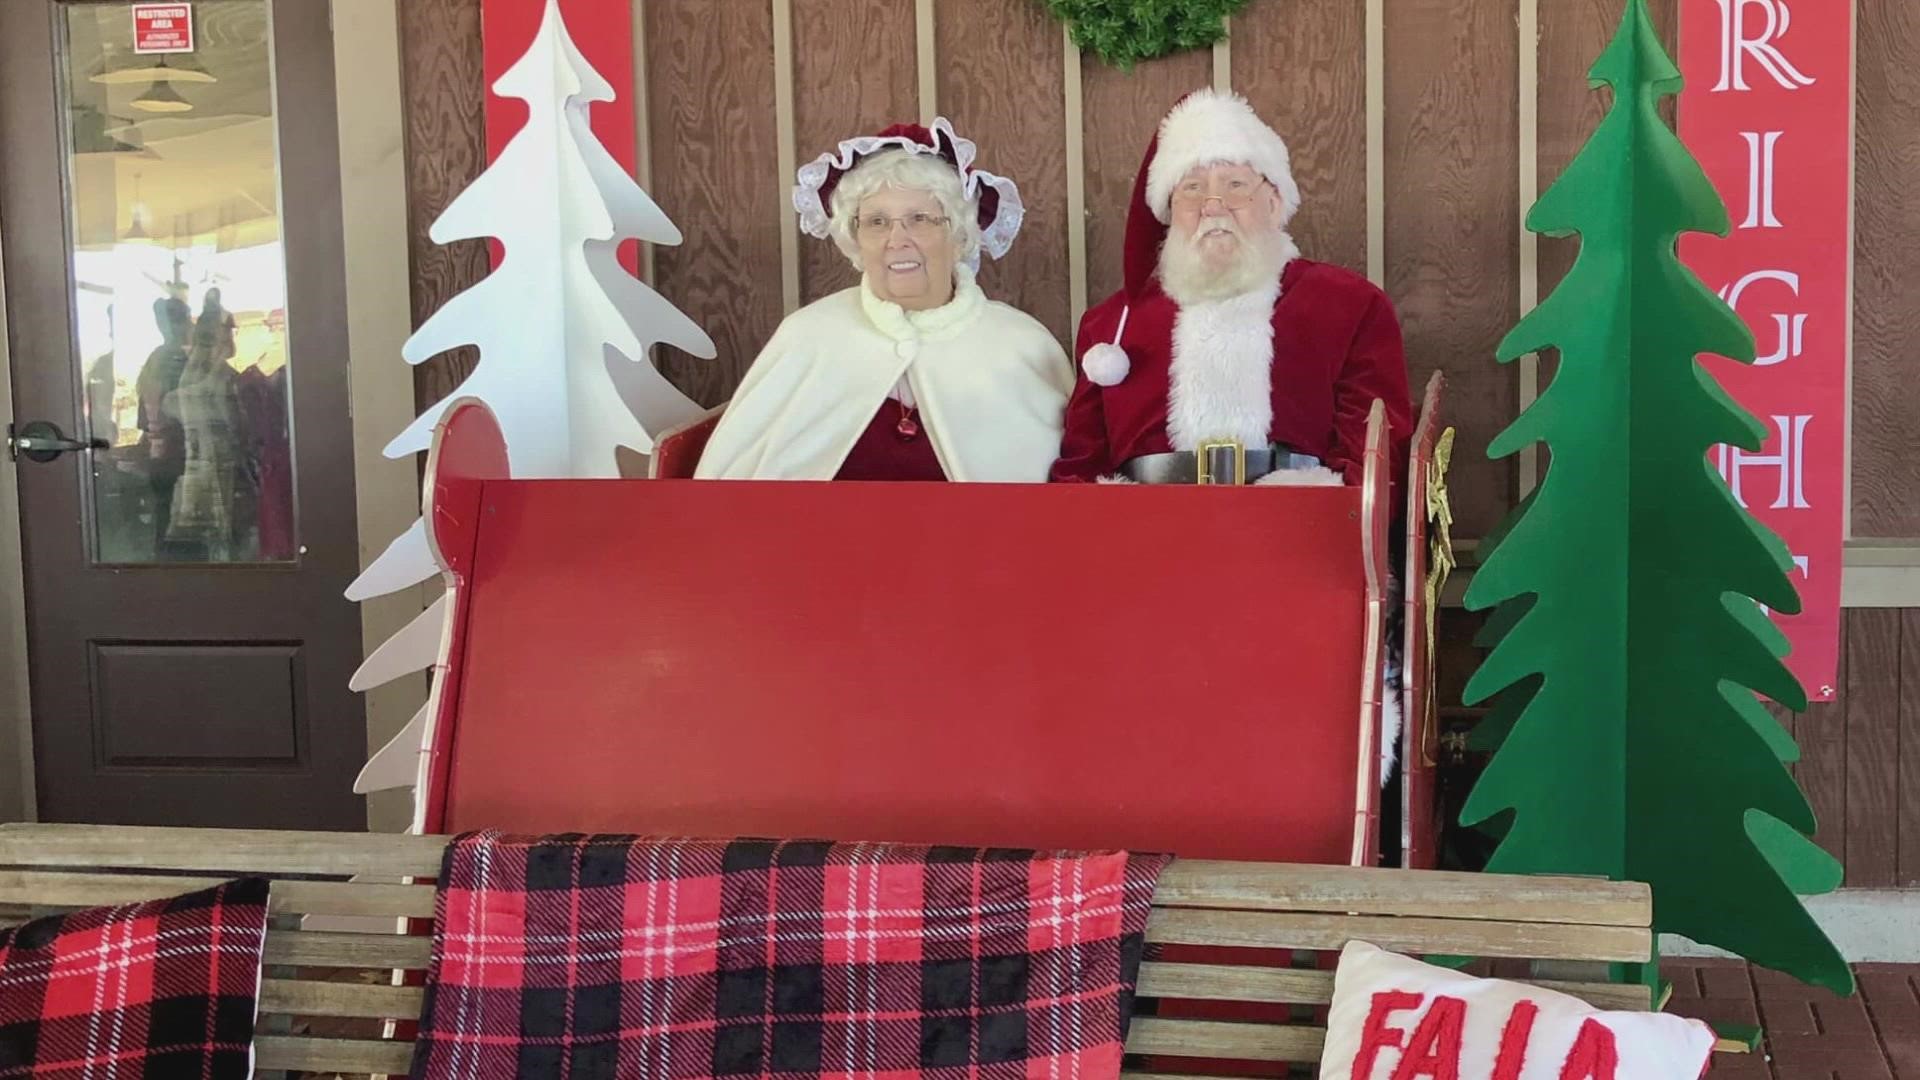 Santa and Mrs. Claus were spotted shopping in Washington, Missouri, and we got an exclusive interview. The town is preparing for its “Santa at the Market” event.